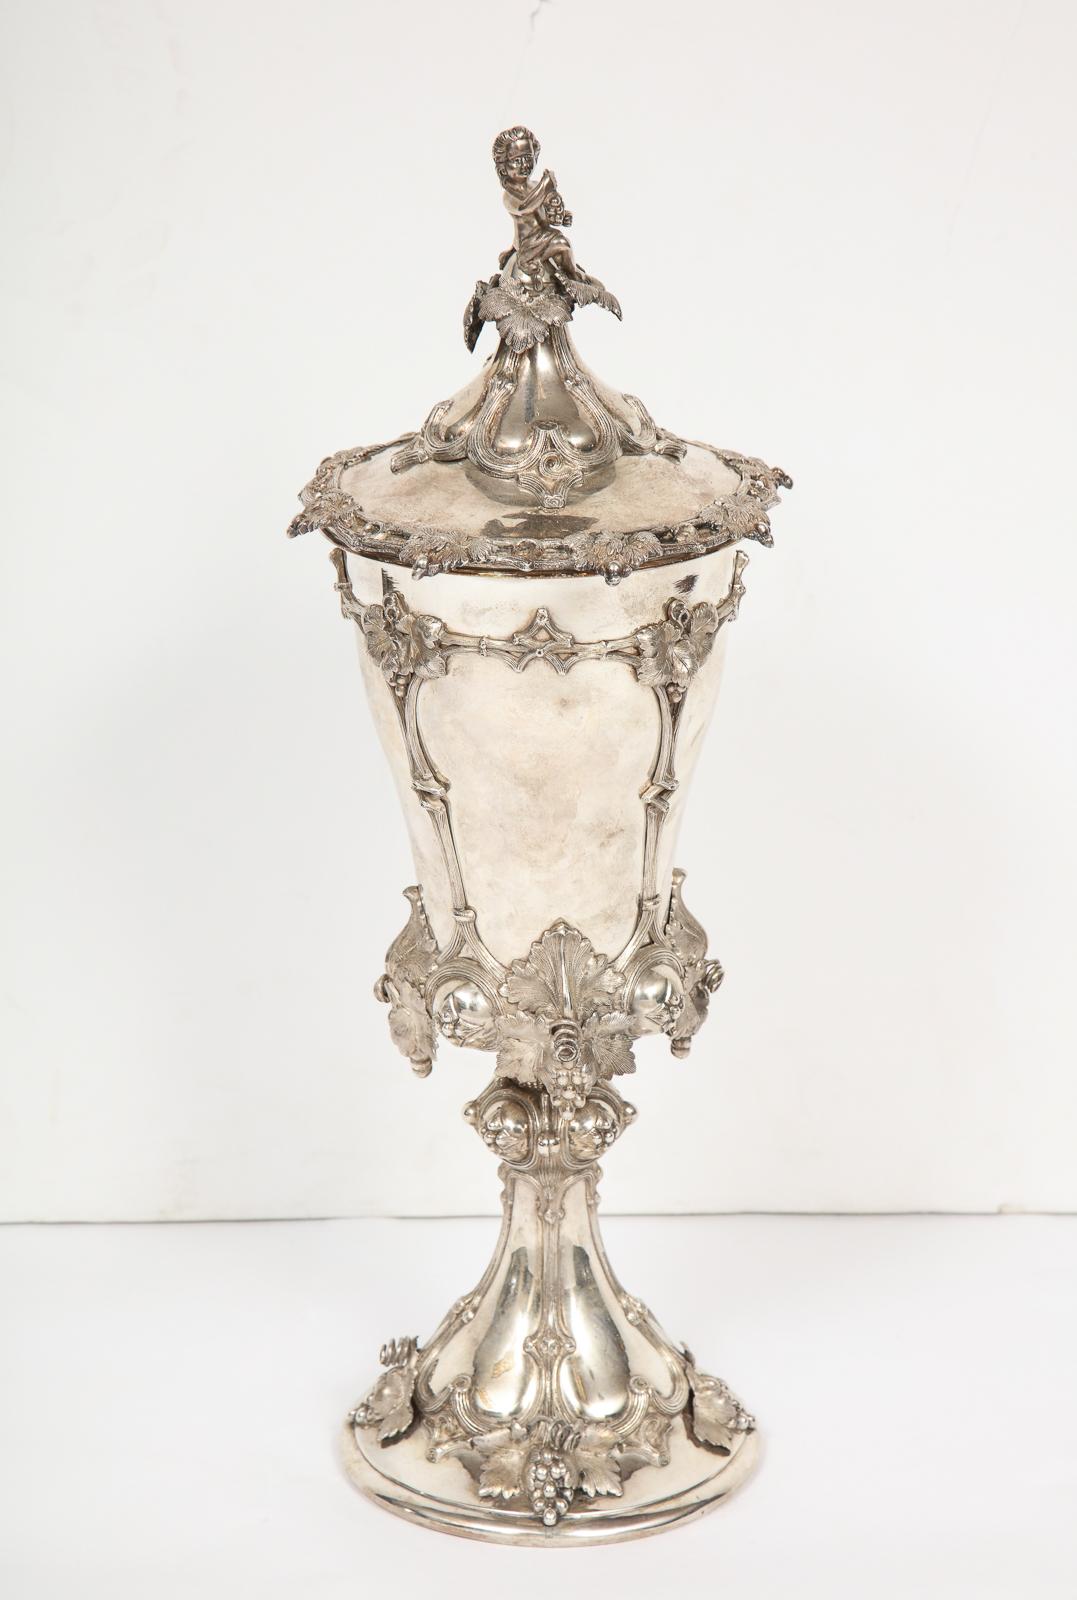 A large antique oversized German silver goblet cup with cover, circa 1900

Marked 800 and also marked 